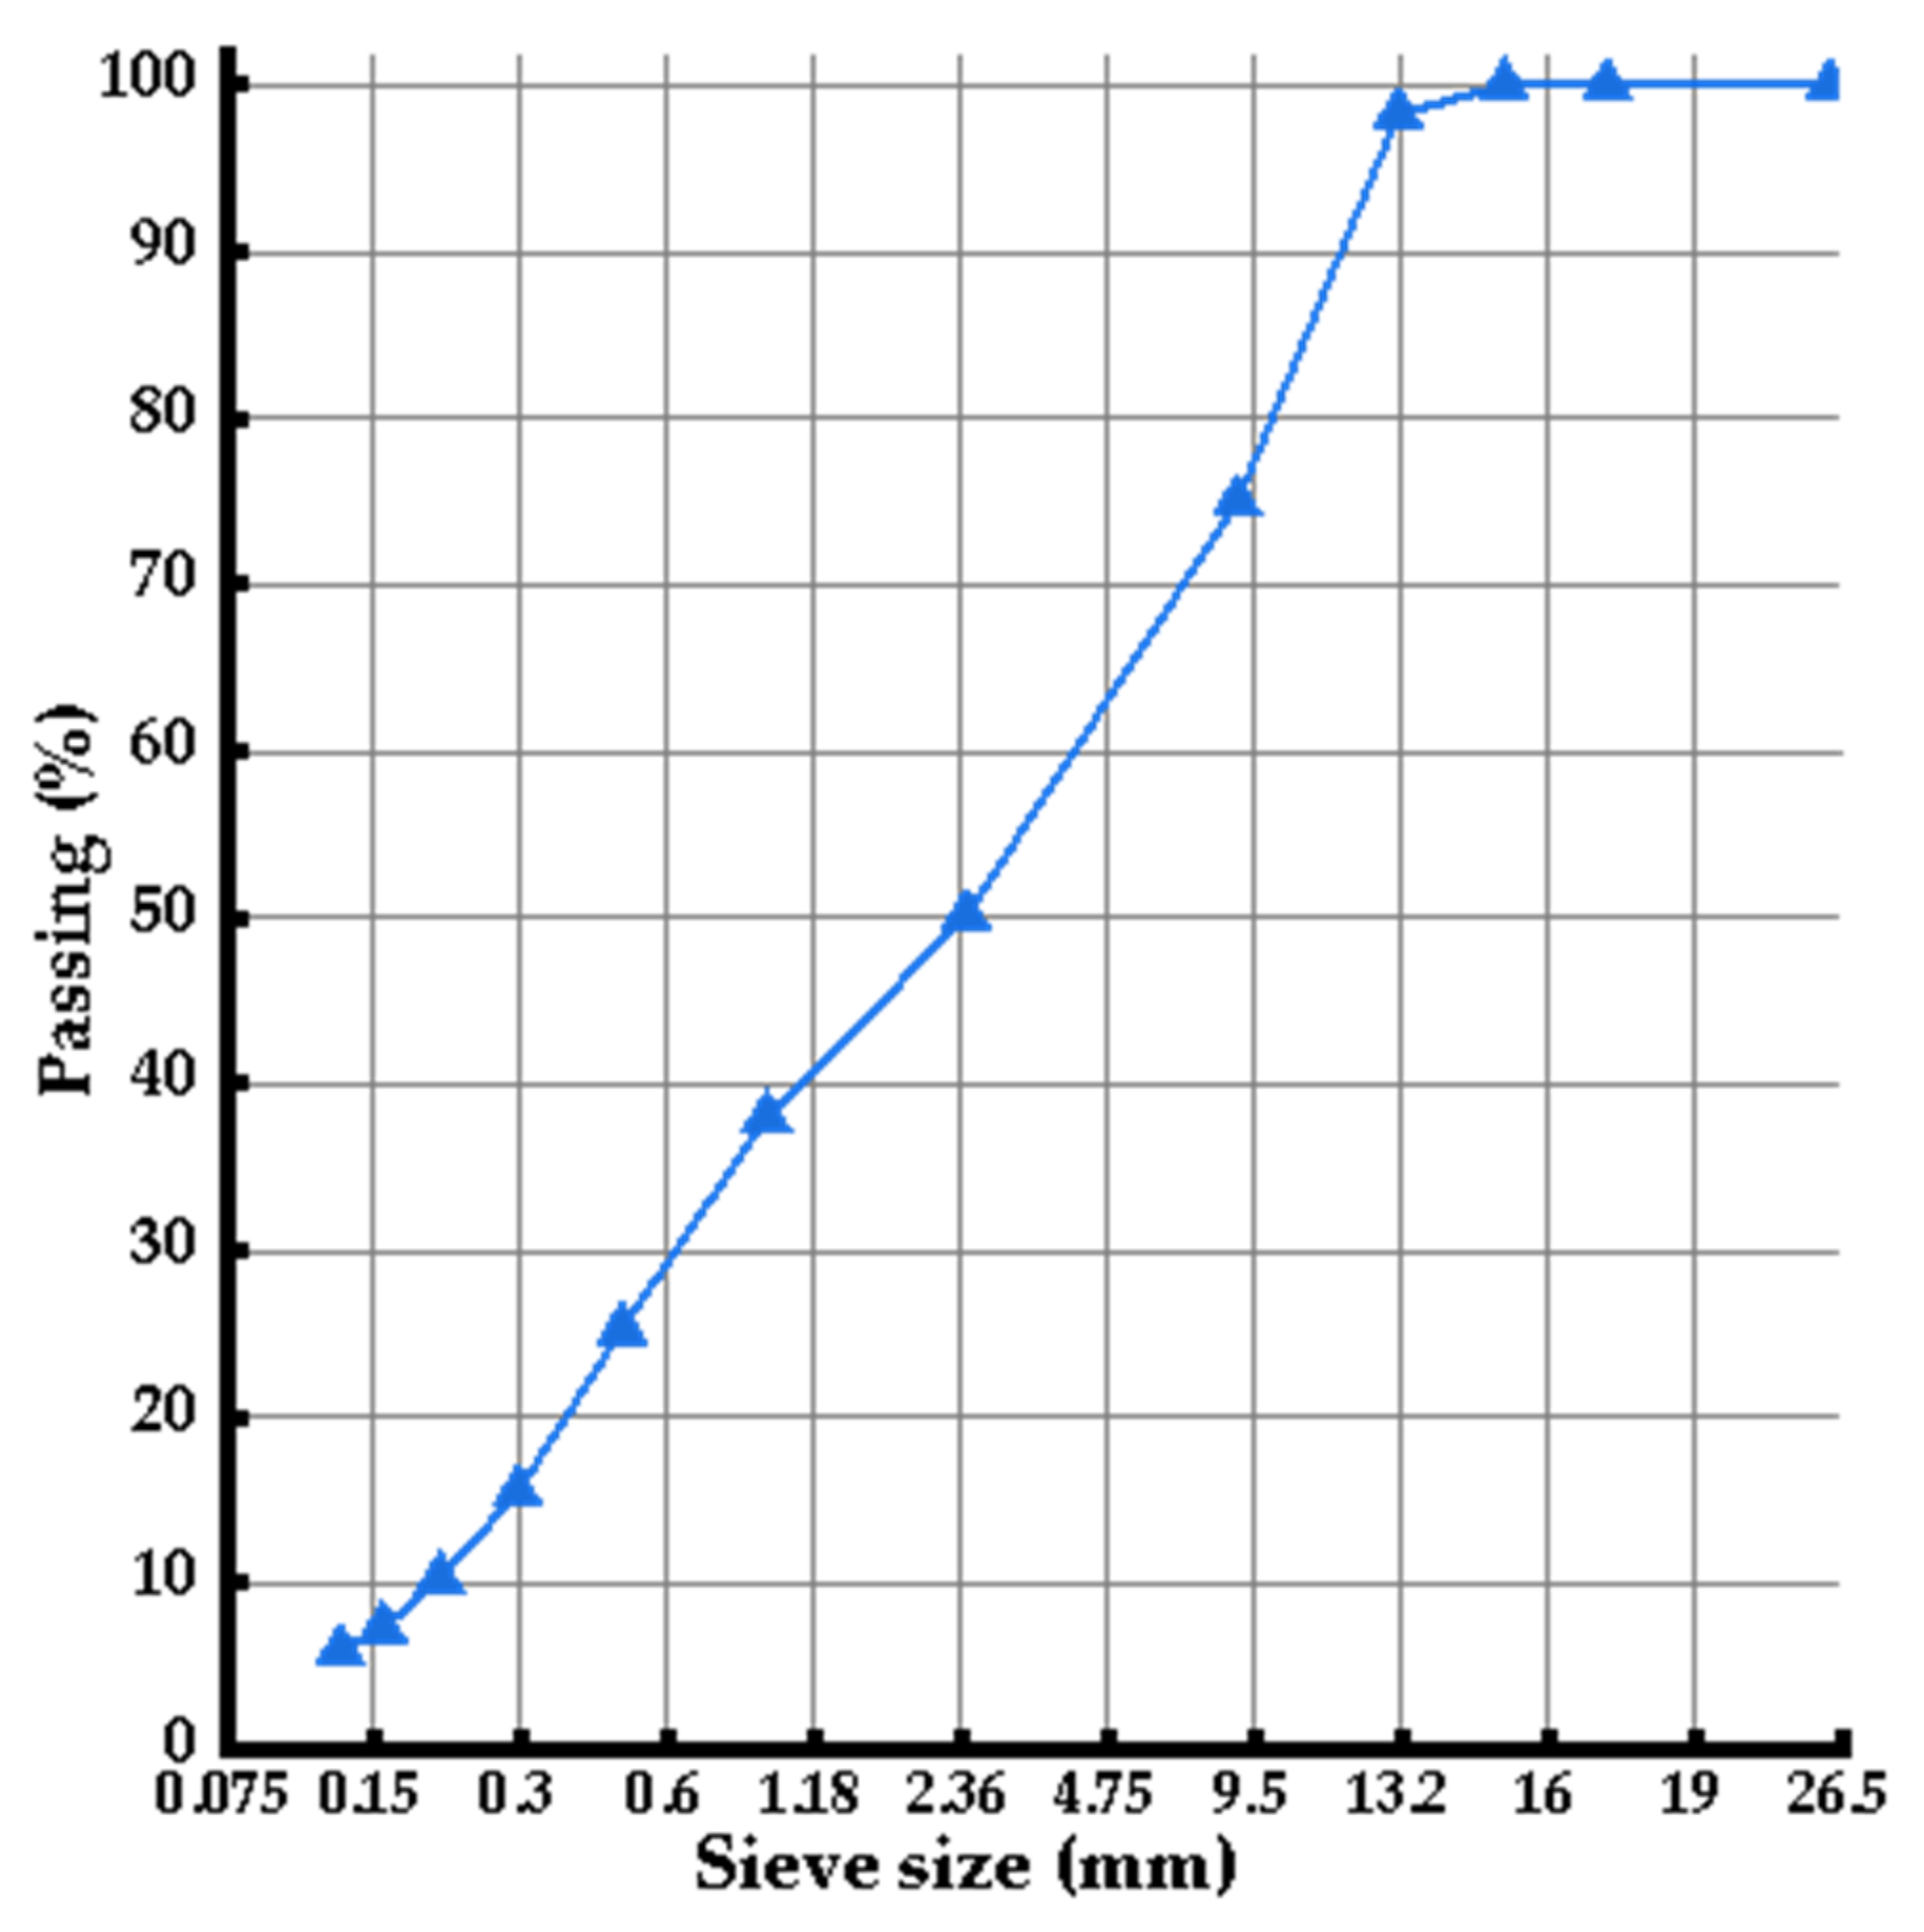 MTR curve showing the relation between binder ratio (ml/g) and the mean